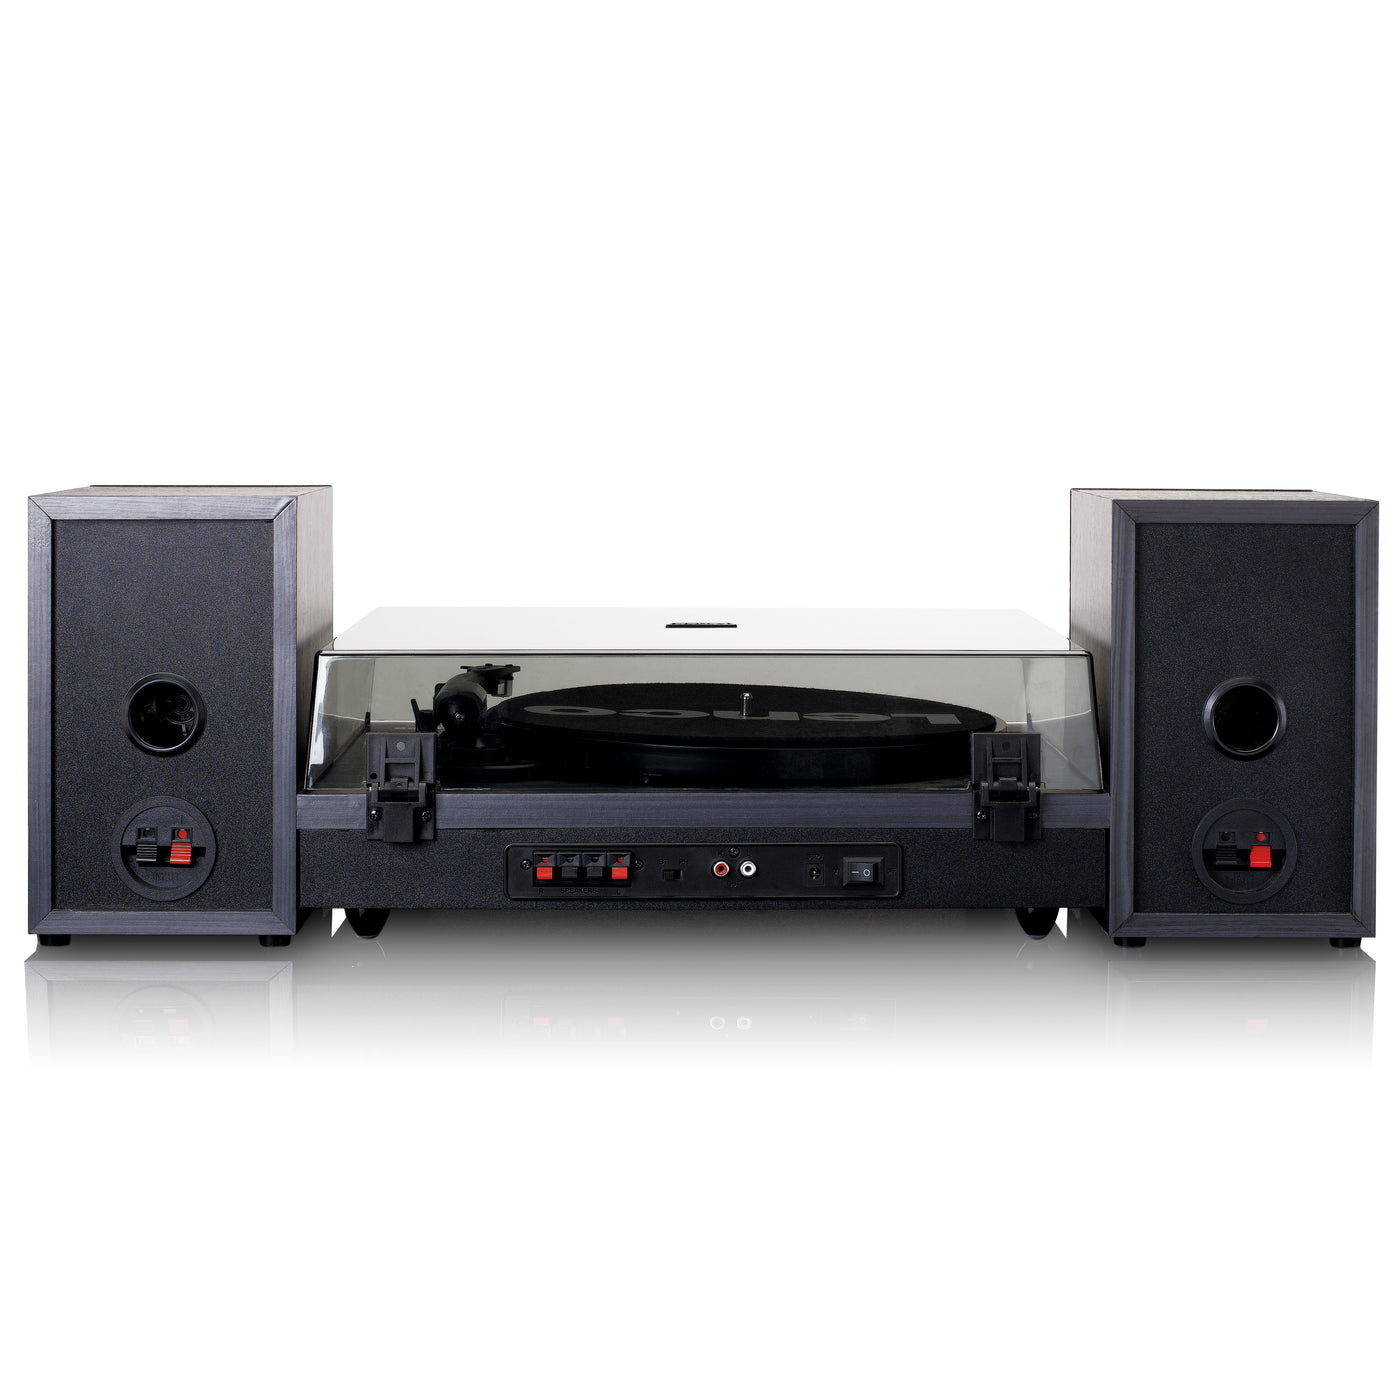 LENCO LS-301BK - Record Player with Bluetooth® and two separate speakers, black